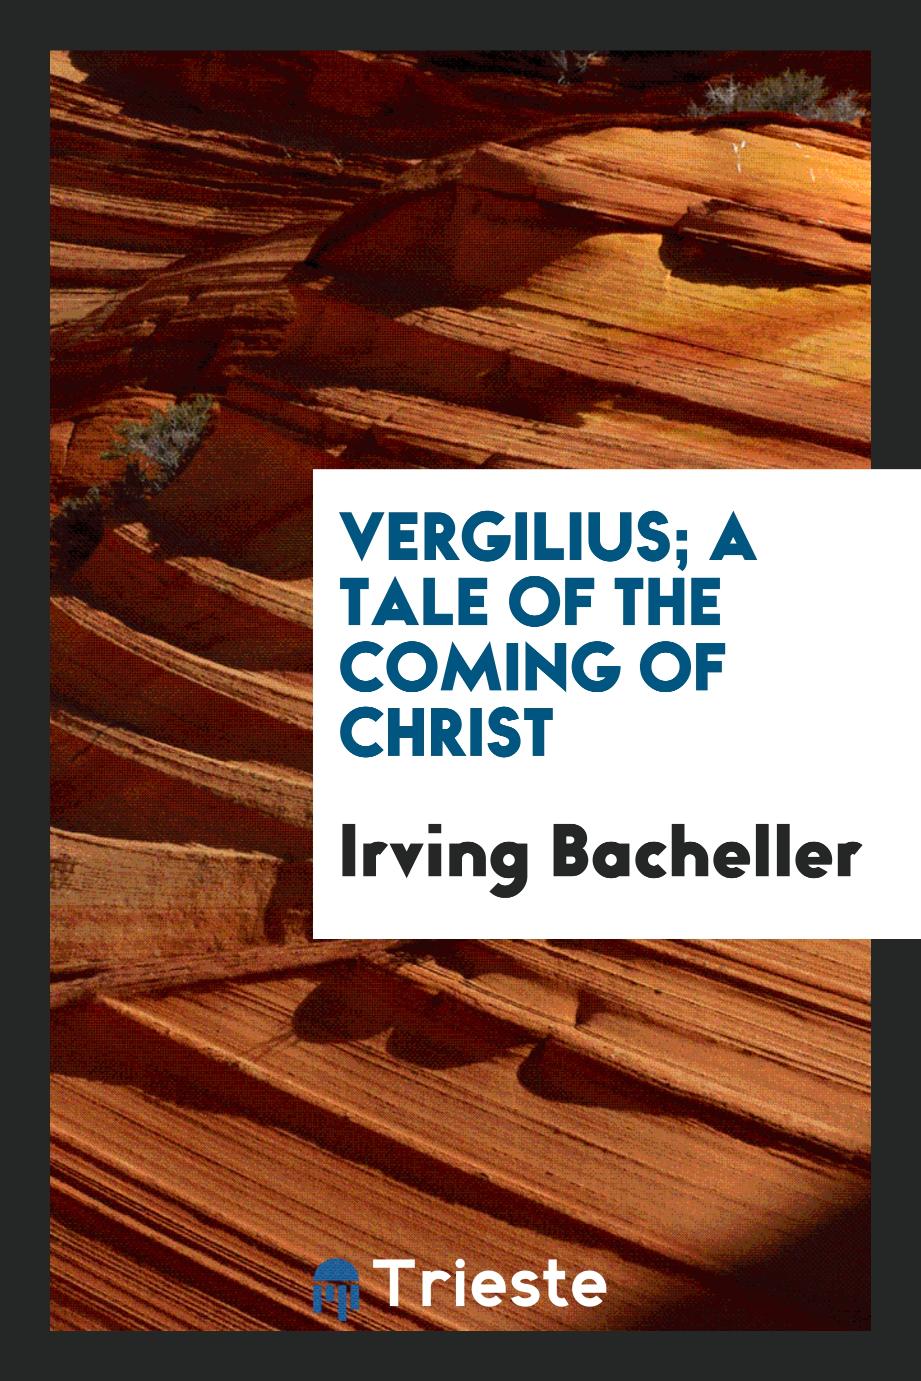 Vergilius; a tale of the coming of Christ